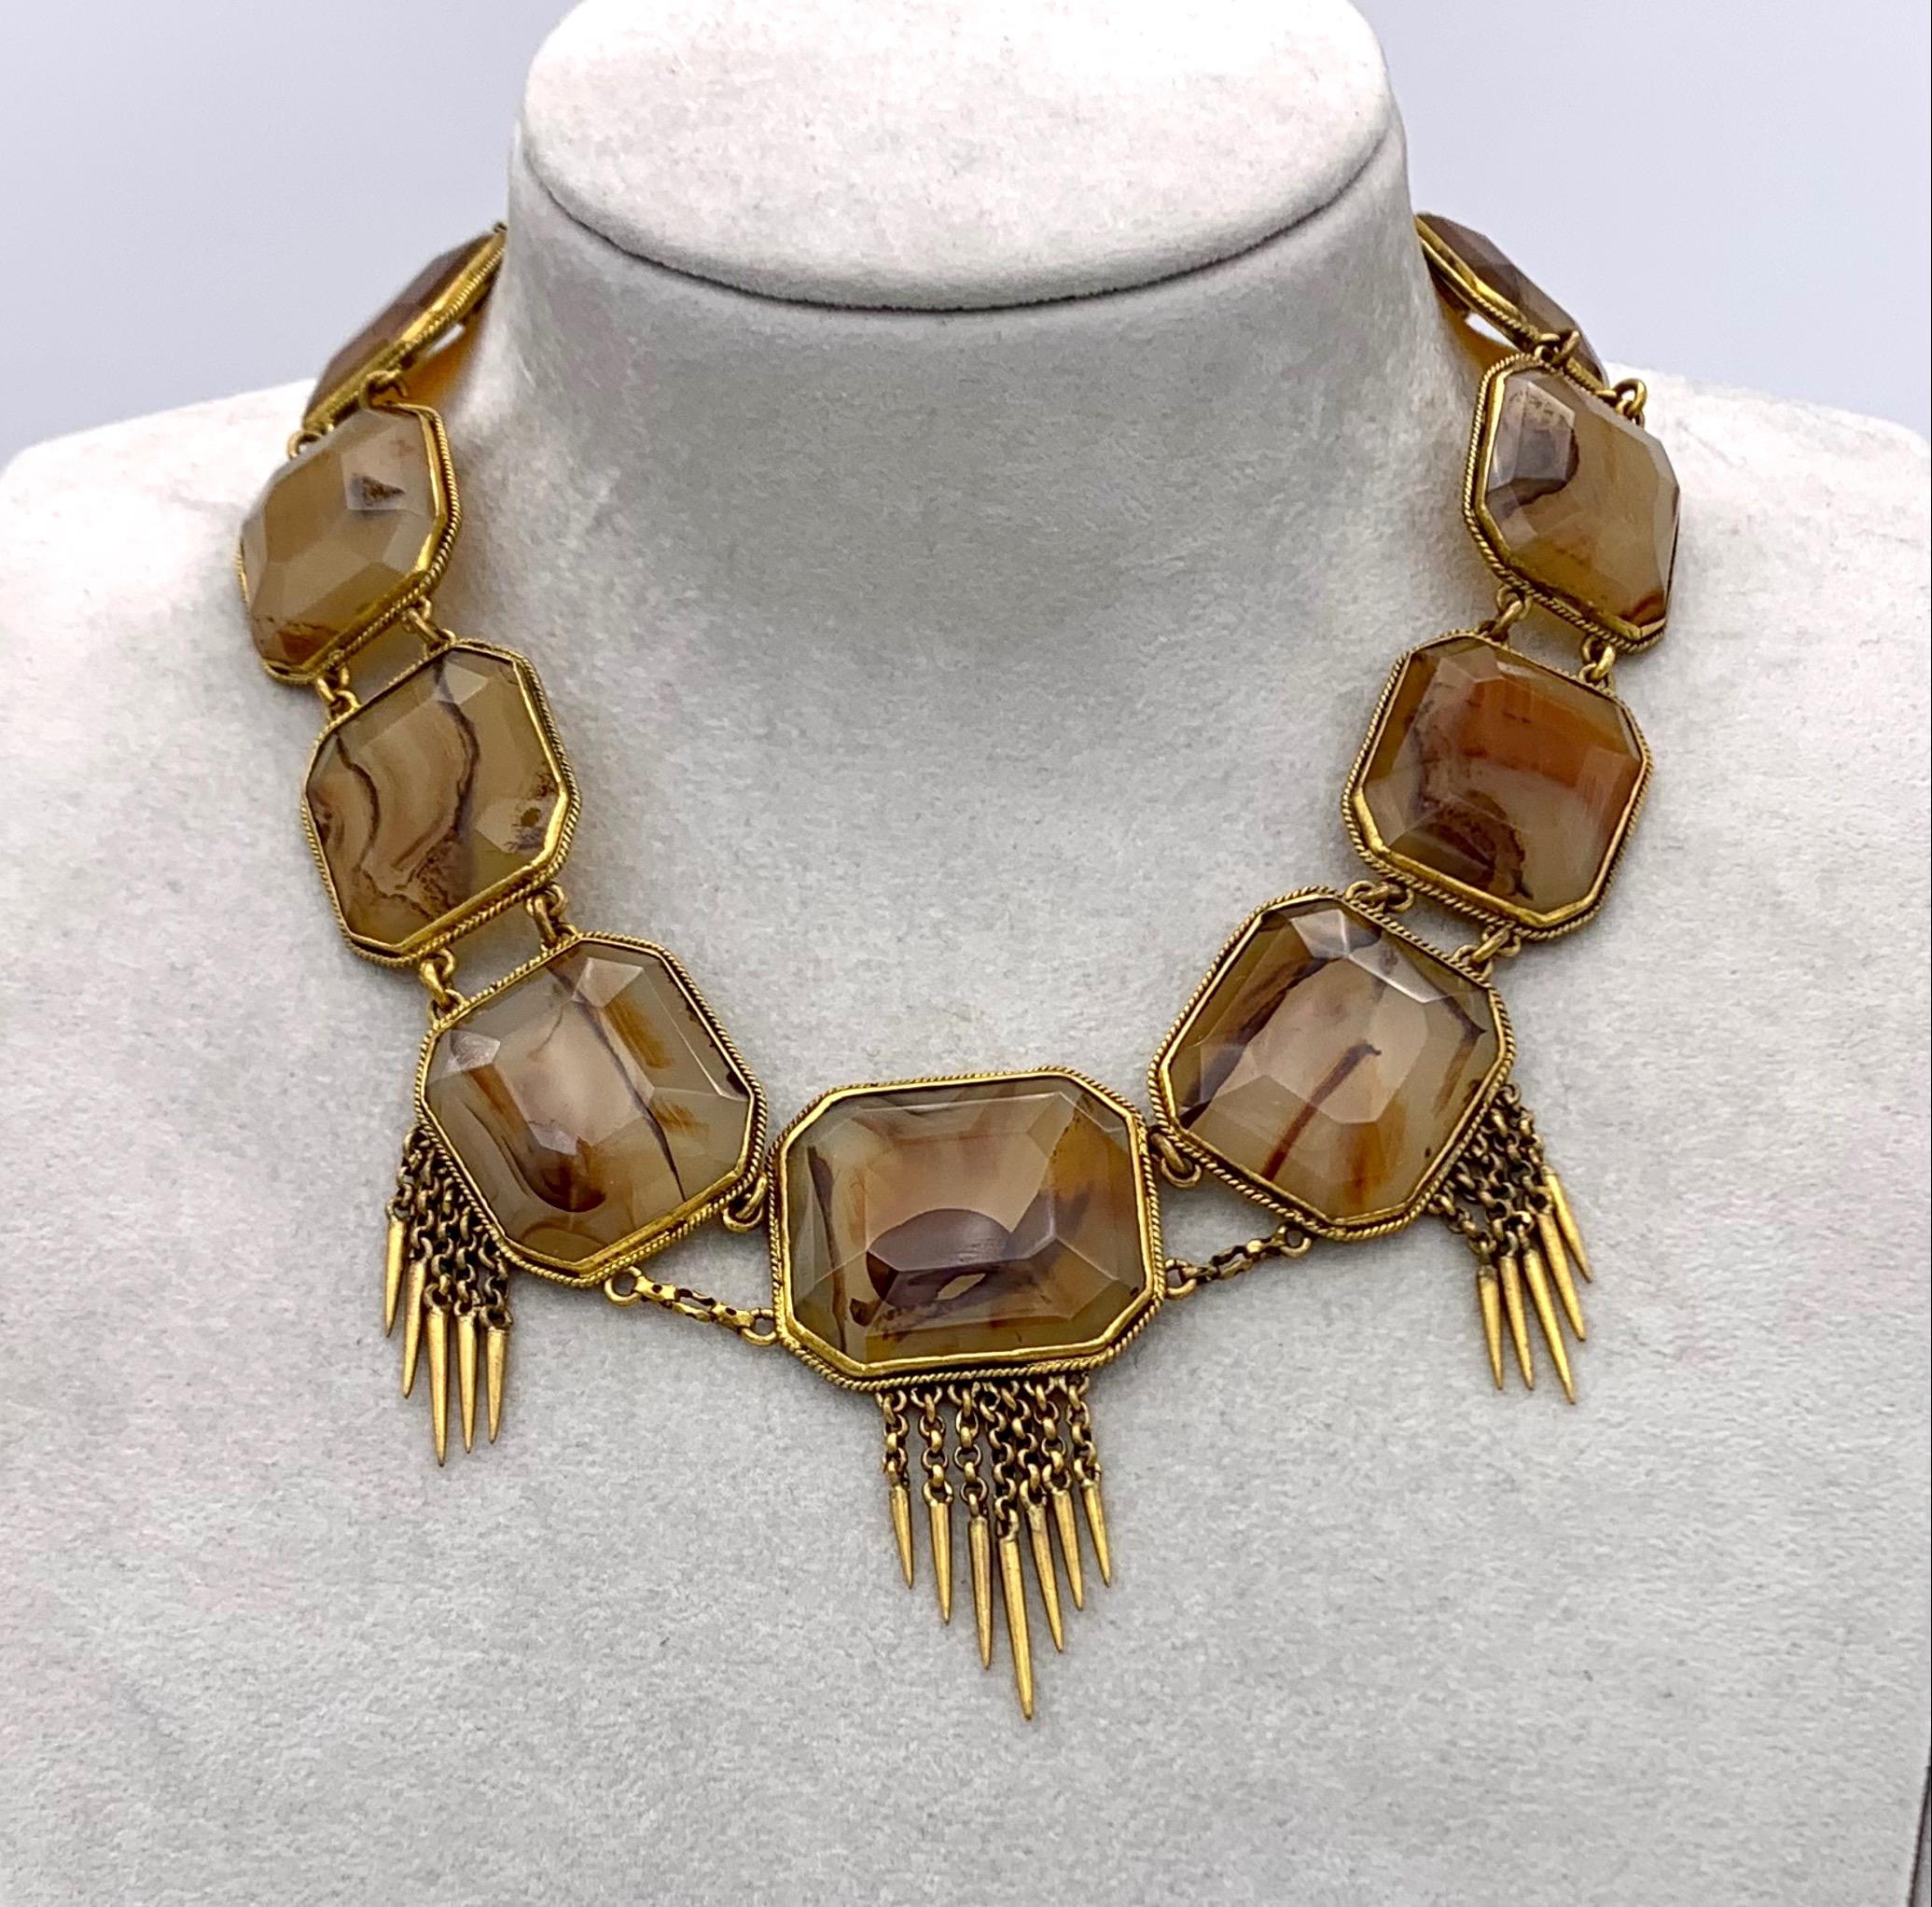 This modernistic victorian demi parure consists out of a stunning nechlace and it's matching bracelet.
The beautiful agates have been carefully chosen, each stone is one of nature's abstract paintings.
The centre of the necklace is enhanced by